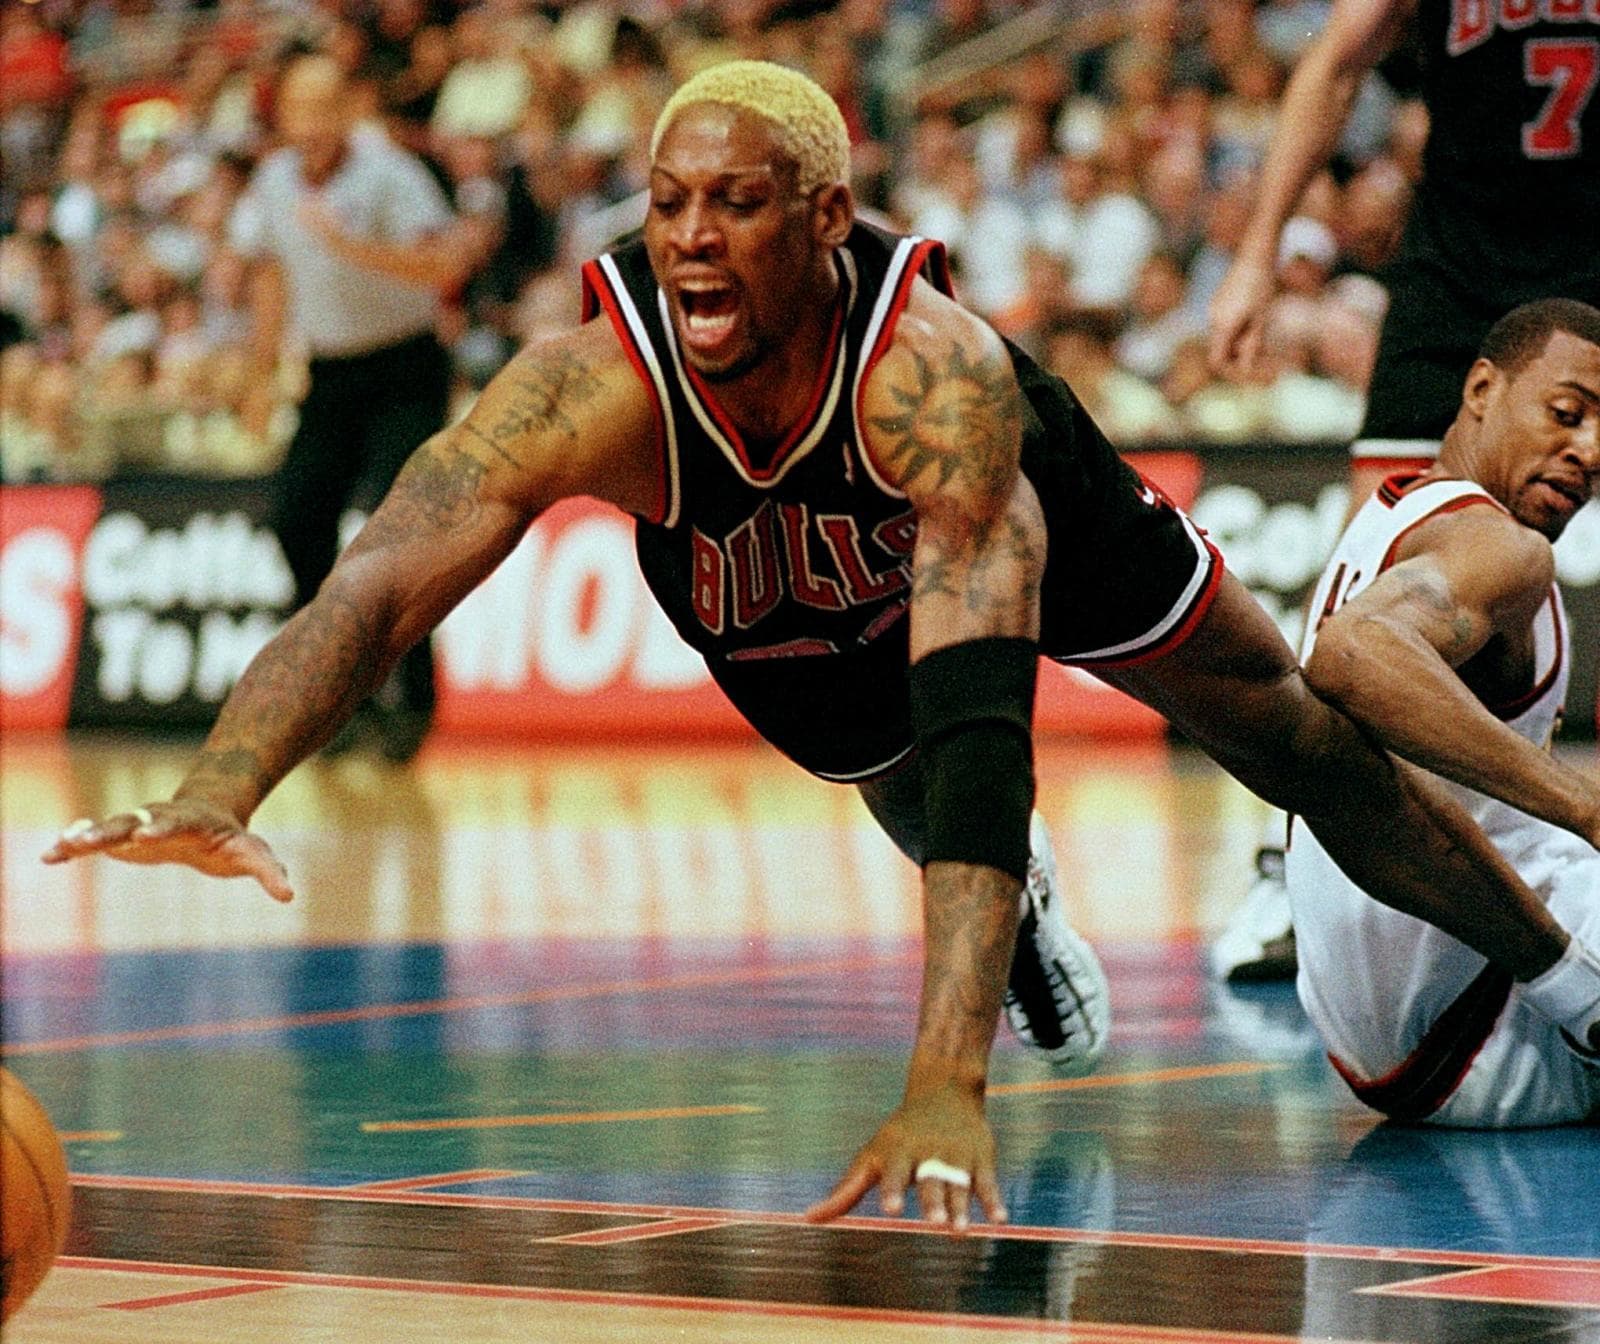 The Last Dance: Dennis Rodman's top moments with the Chicago Bulls